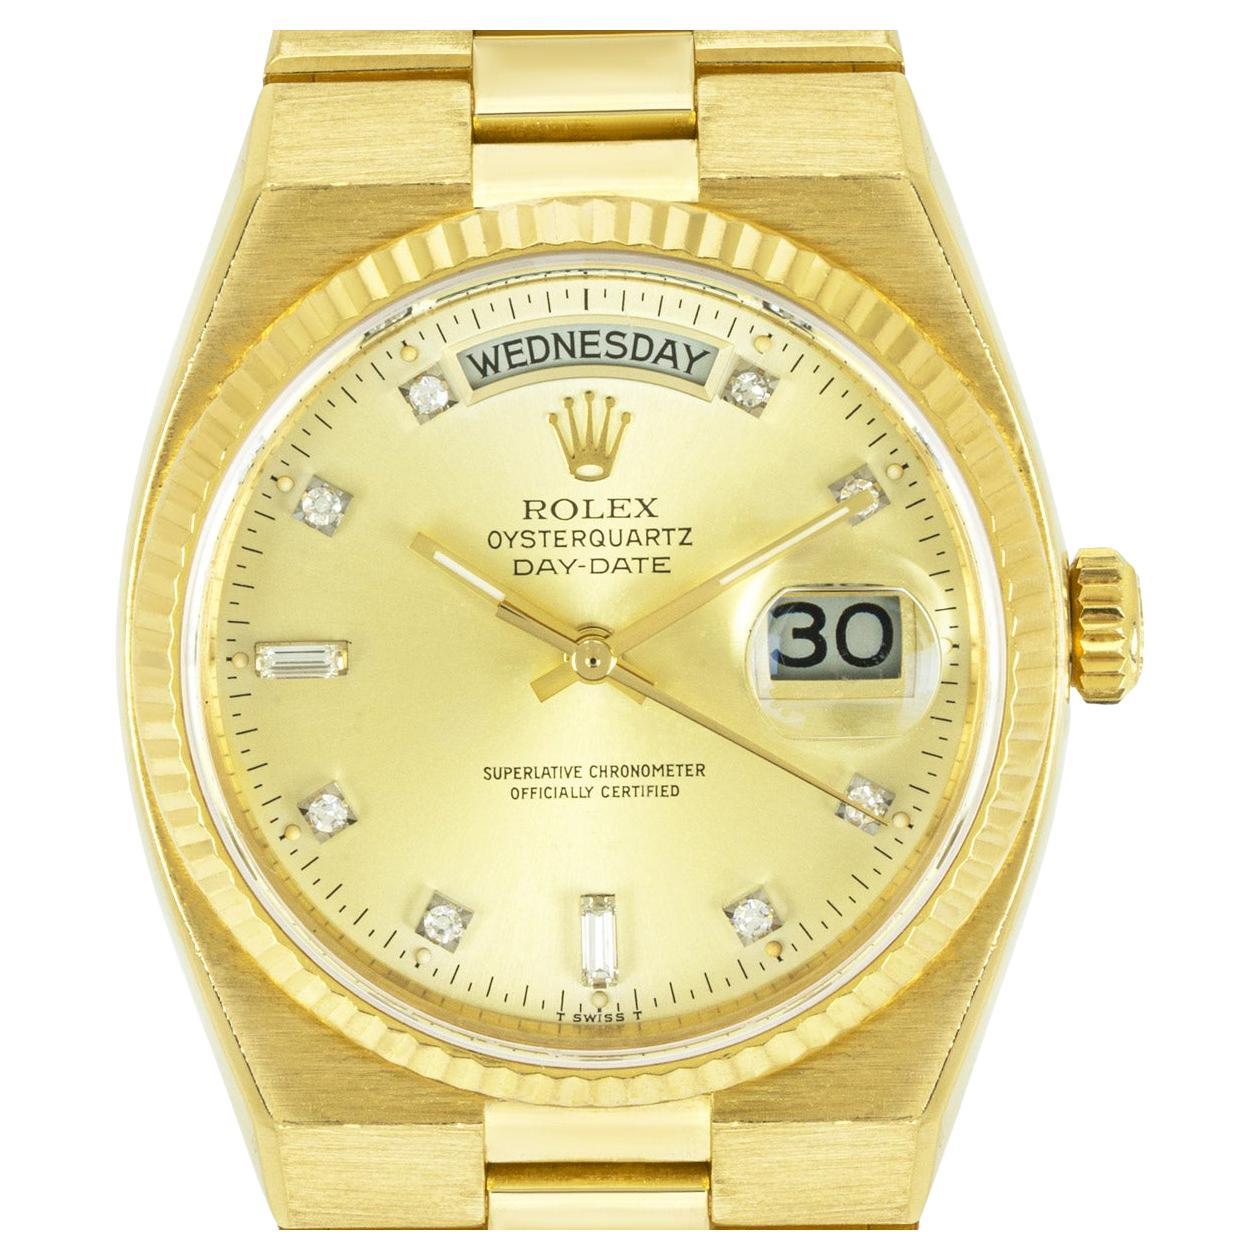 A mens 36mm Day-Date Oysterquartz in yellow gold by Rolex. Featuring a champagne dial with diamond set hour markers and a fixed fluted yellow gold bezel.

Fitted with a sapphire glass, Oysterquartz movement and an 18k yellow gold Oysterquartz